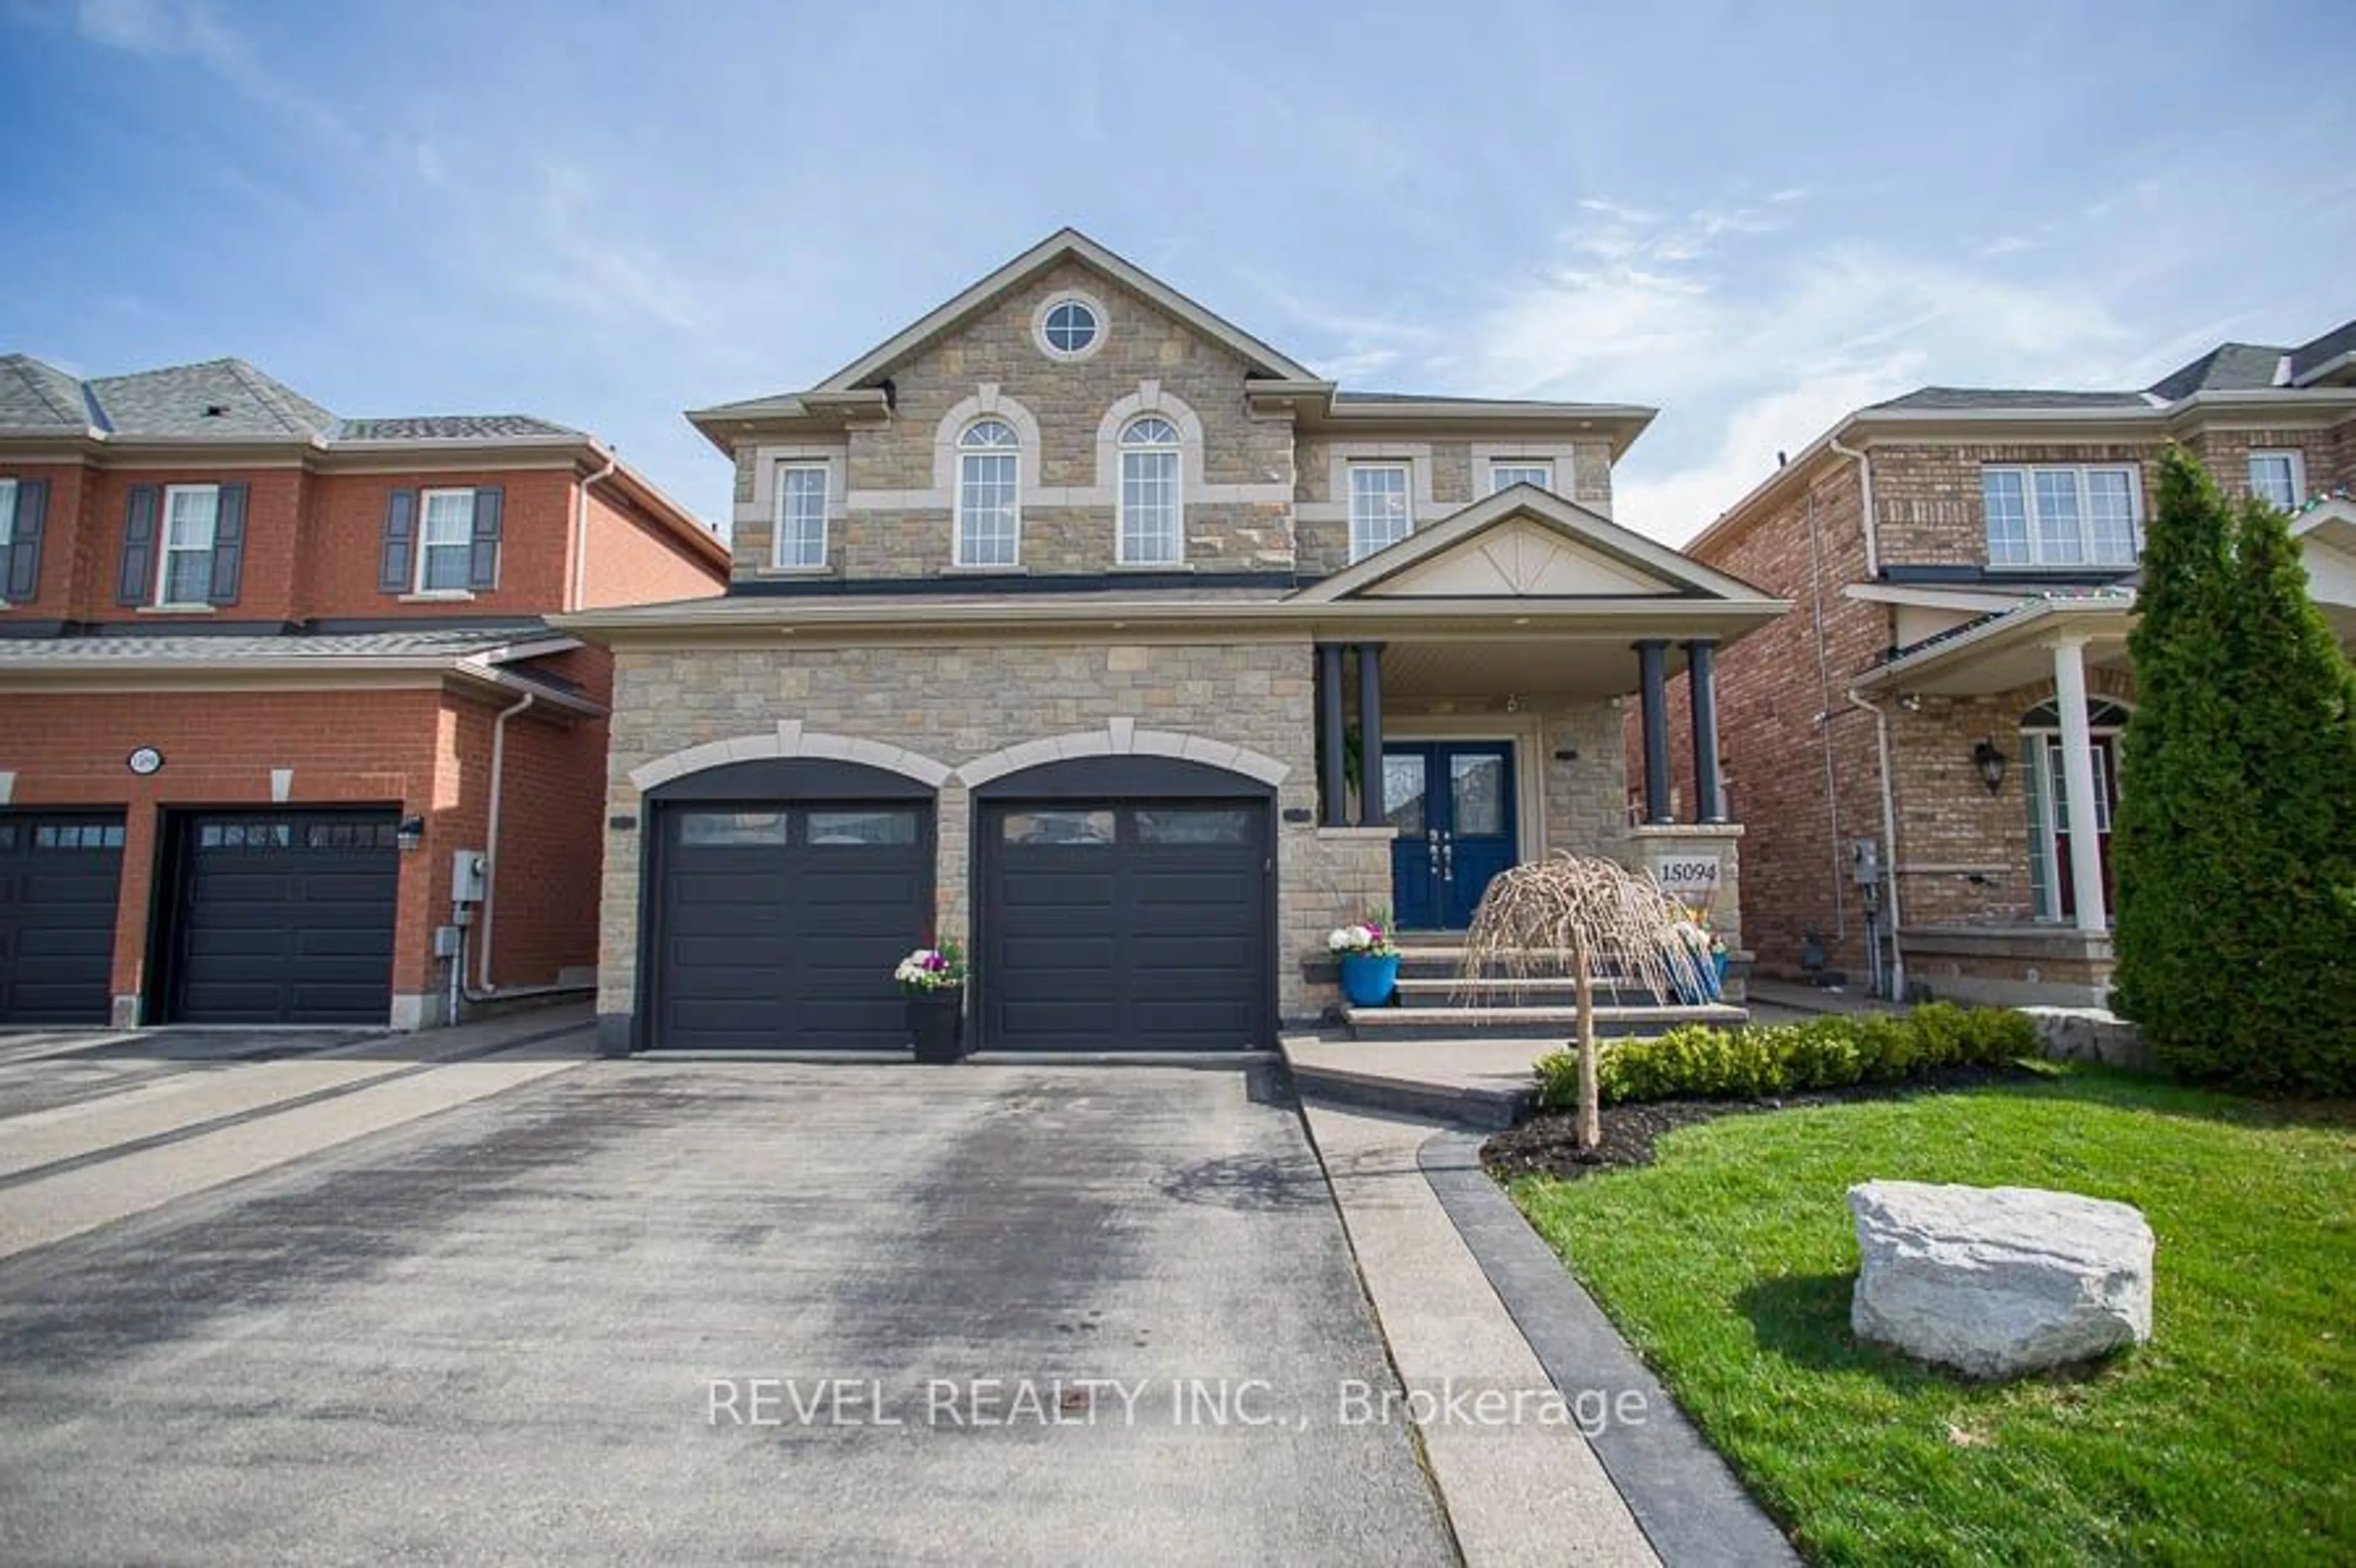 Home with brick exterior material for 15094 Danby Rd, Halton Hills Ontario L7G 0B1